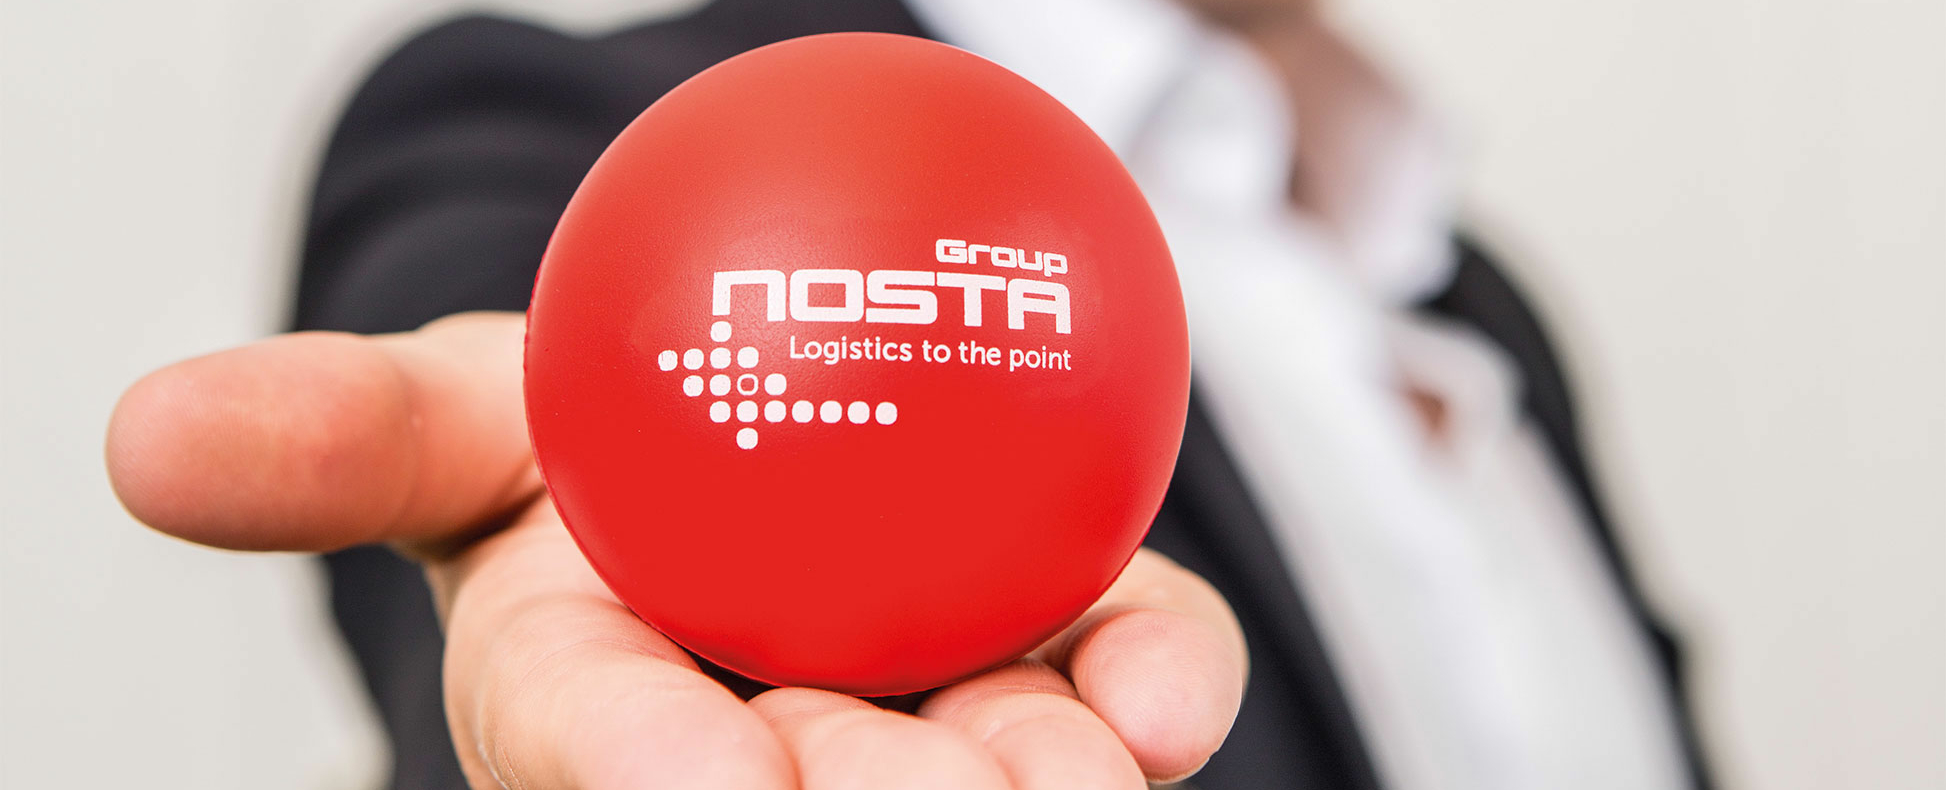 NOSTA Group mission statement with red NOSTA ball